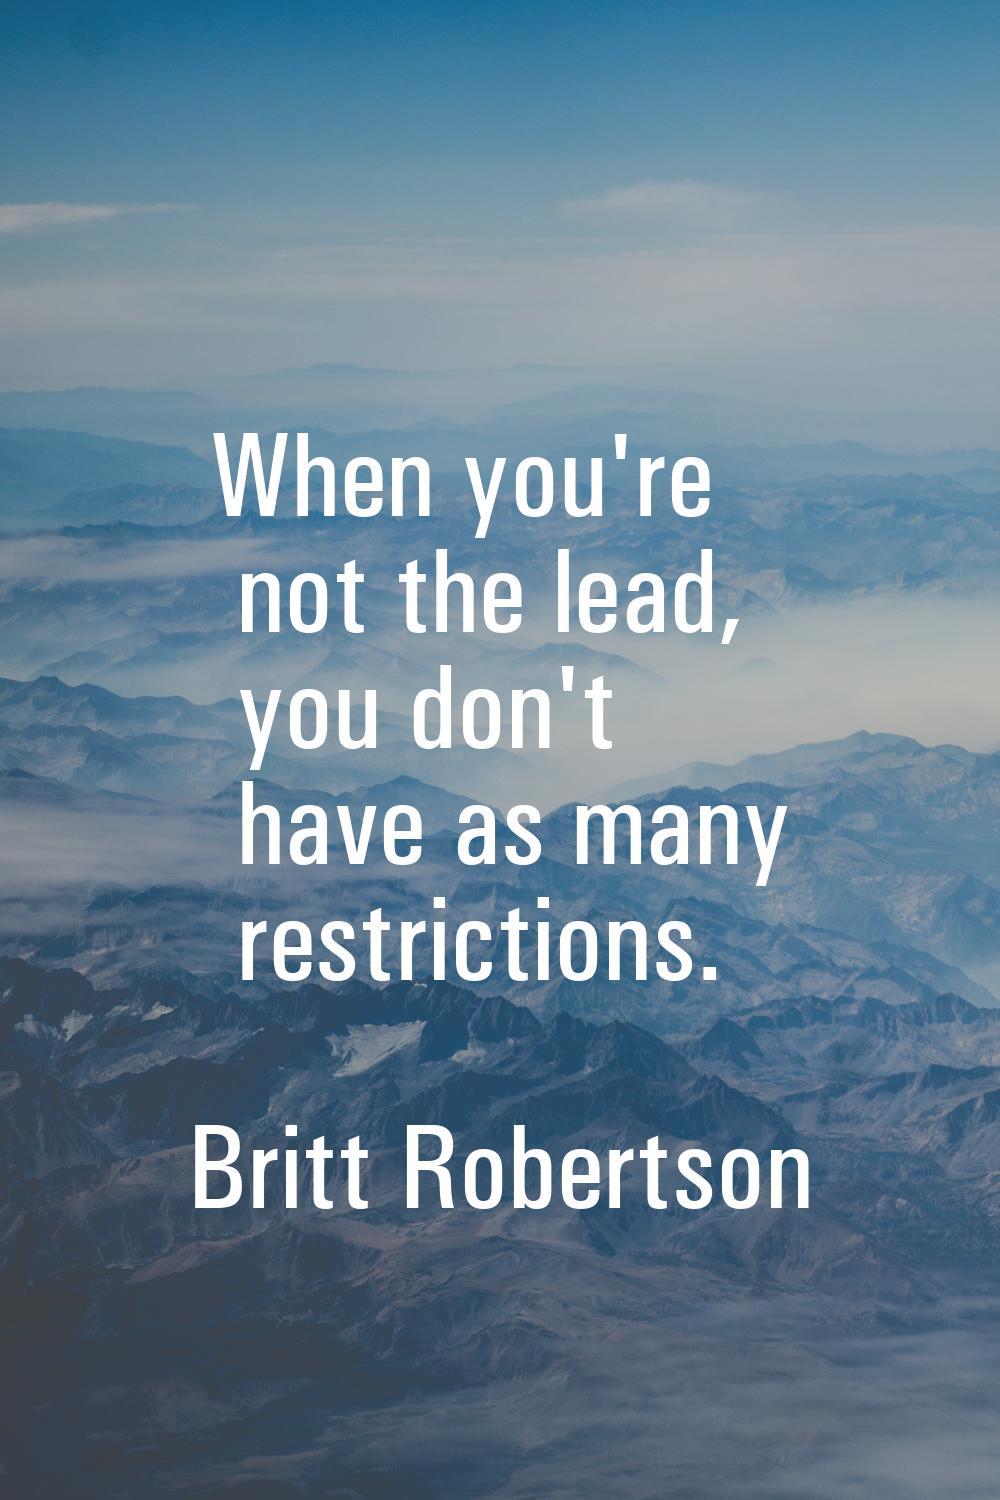 When you're not the lead, you don't have as many restrictions.